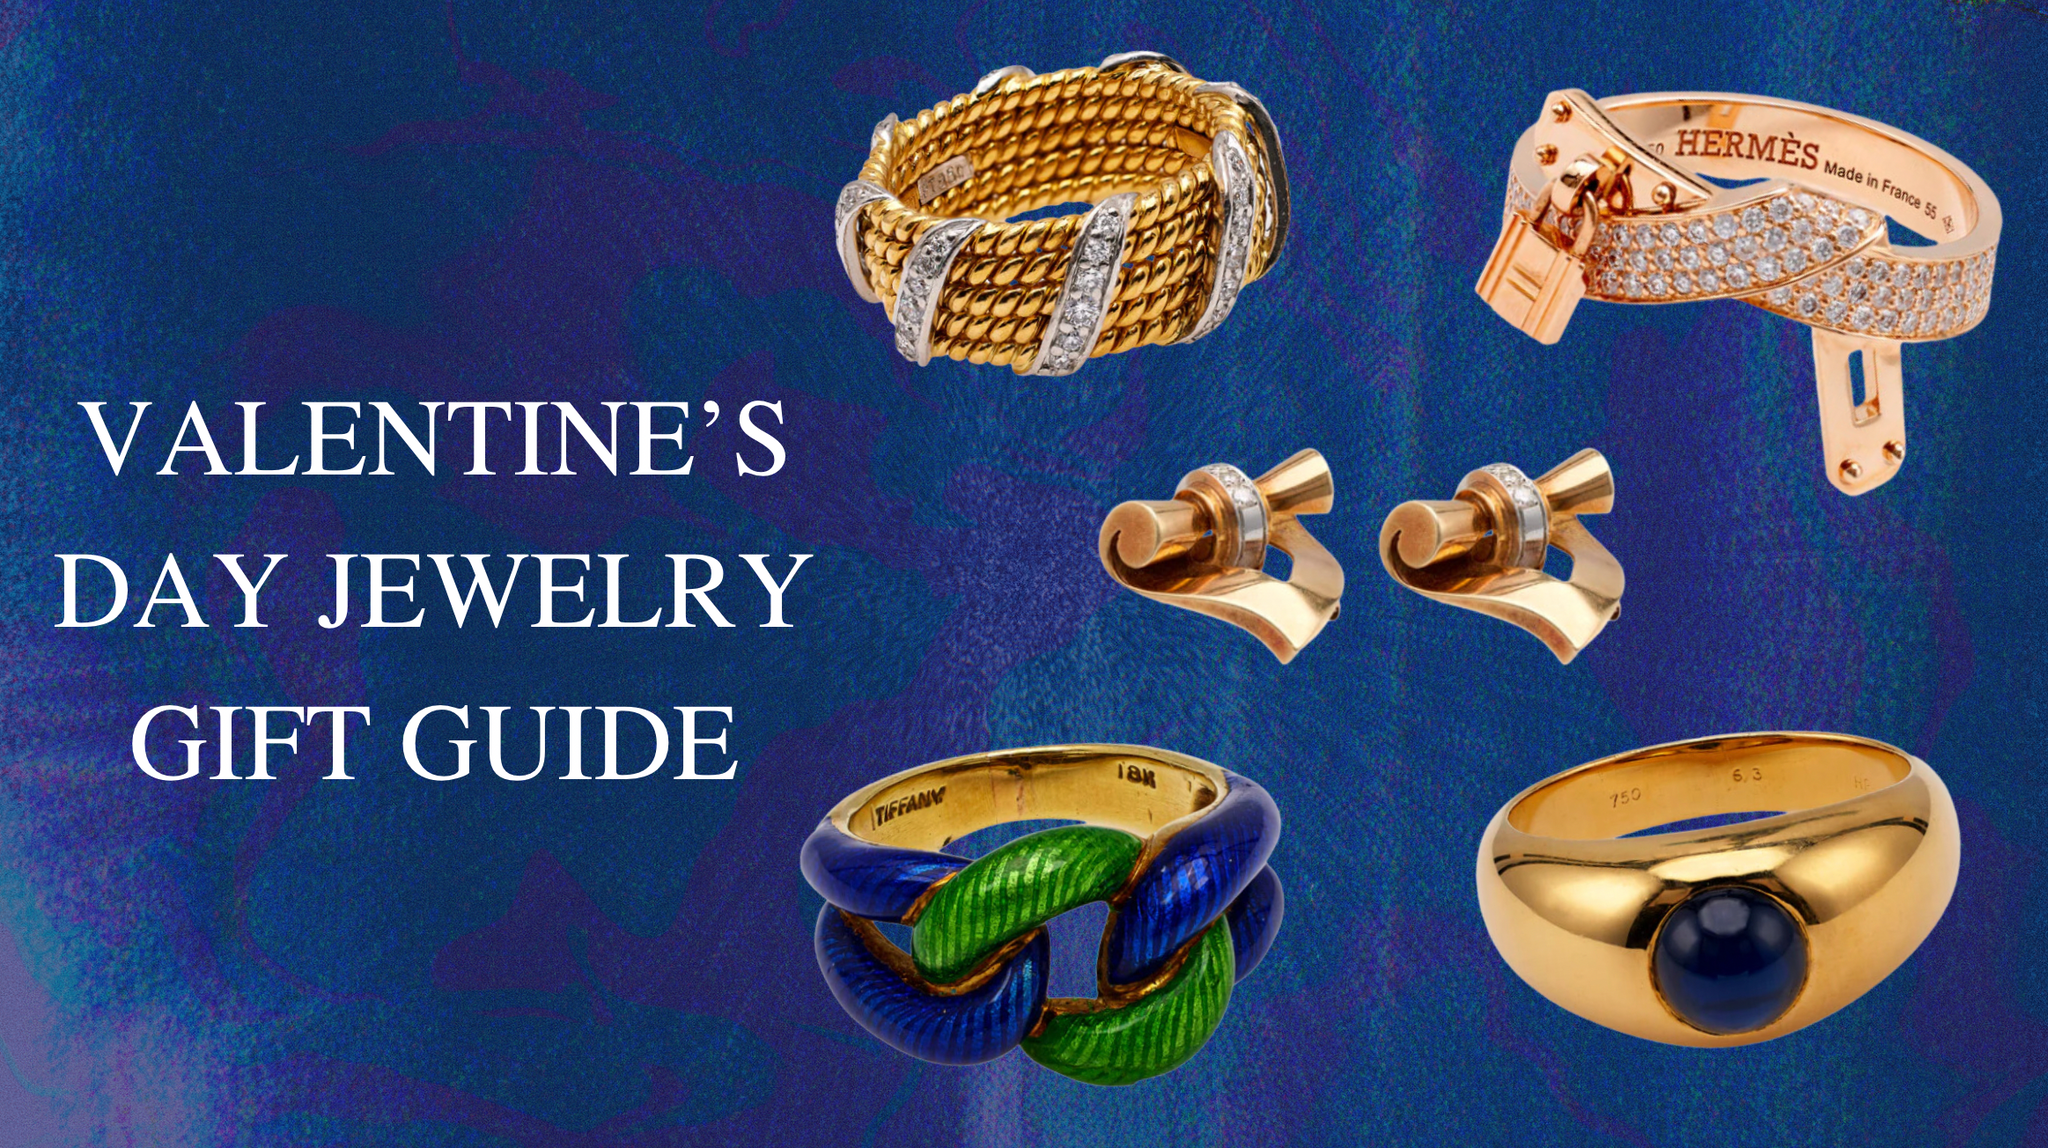 Valentine's Day Jewelry Gift Guide - Jack Weir & Sons